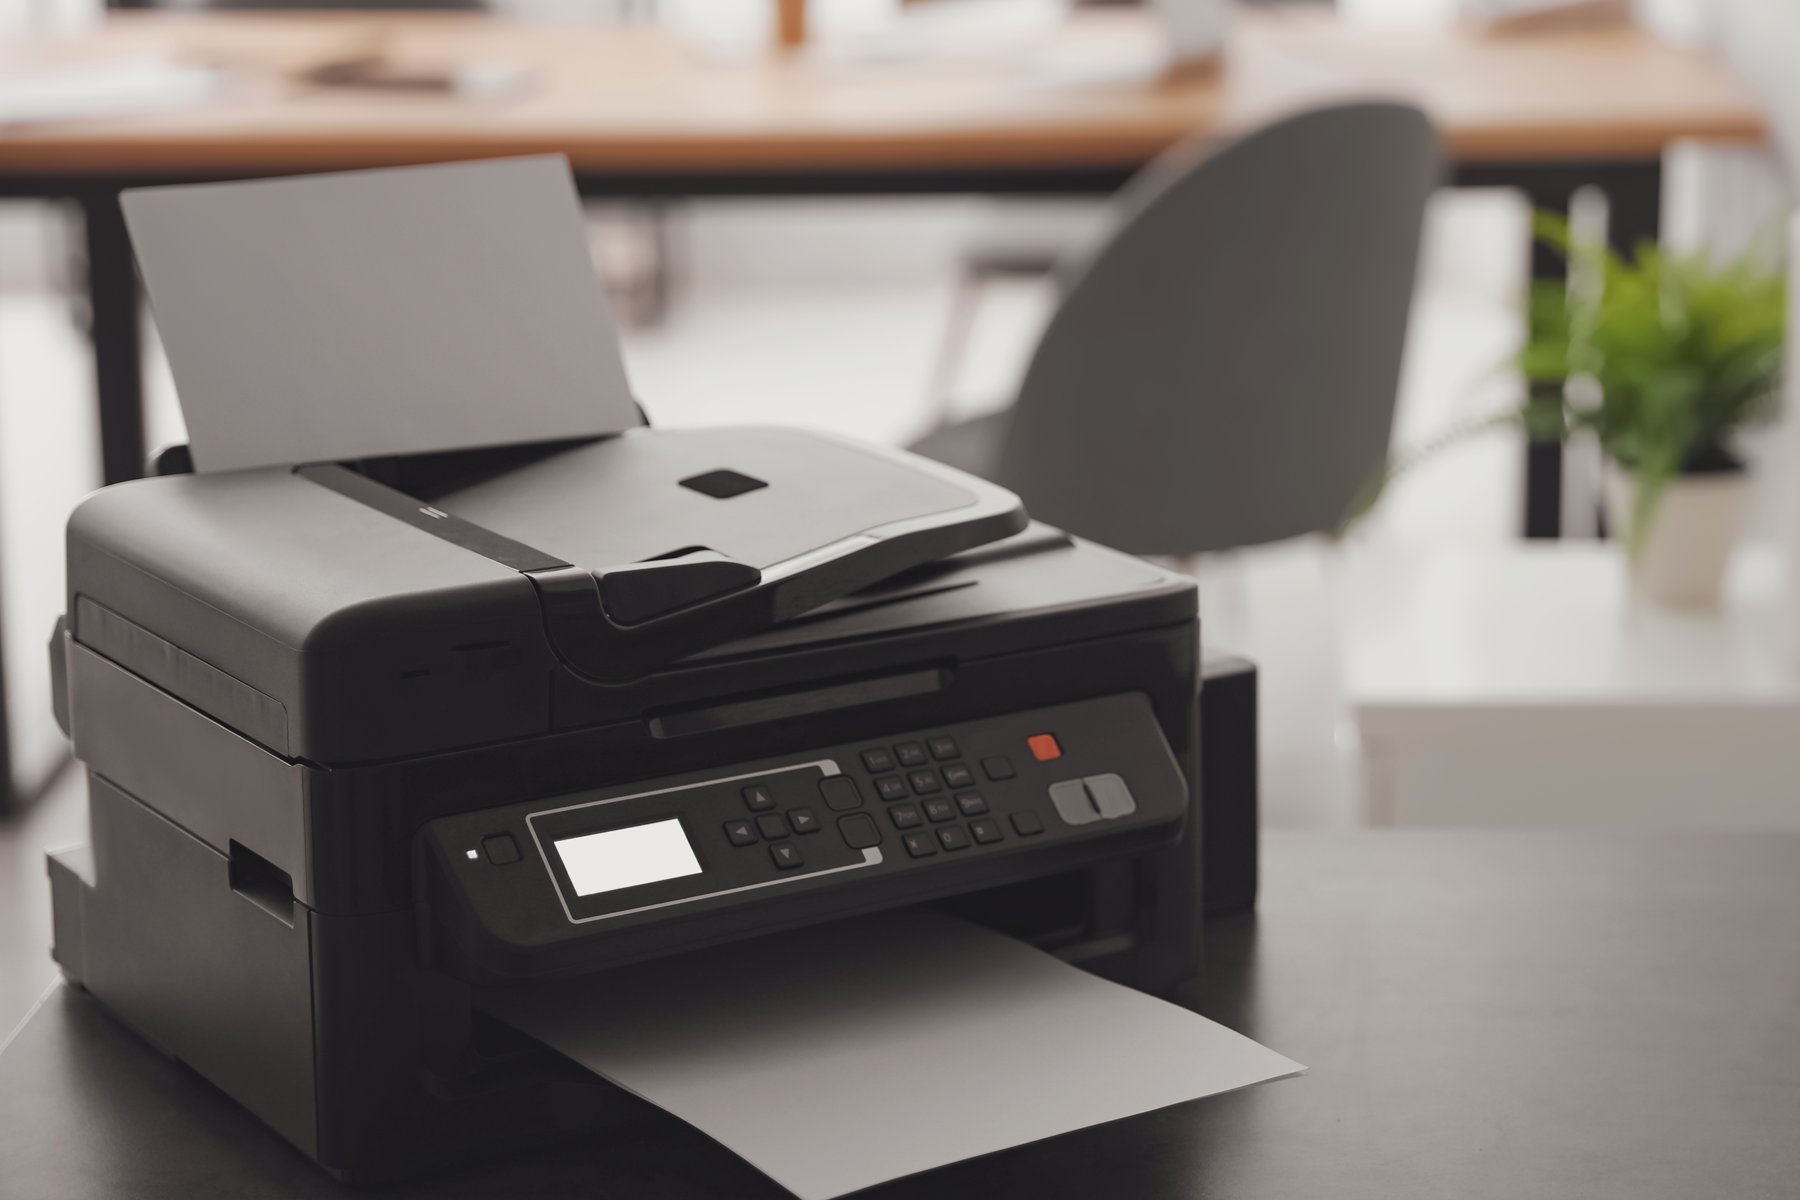 How To Find A Printer’s IP Address